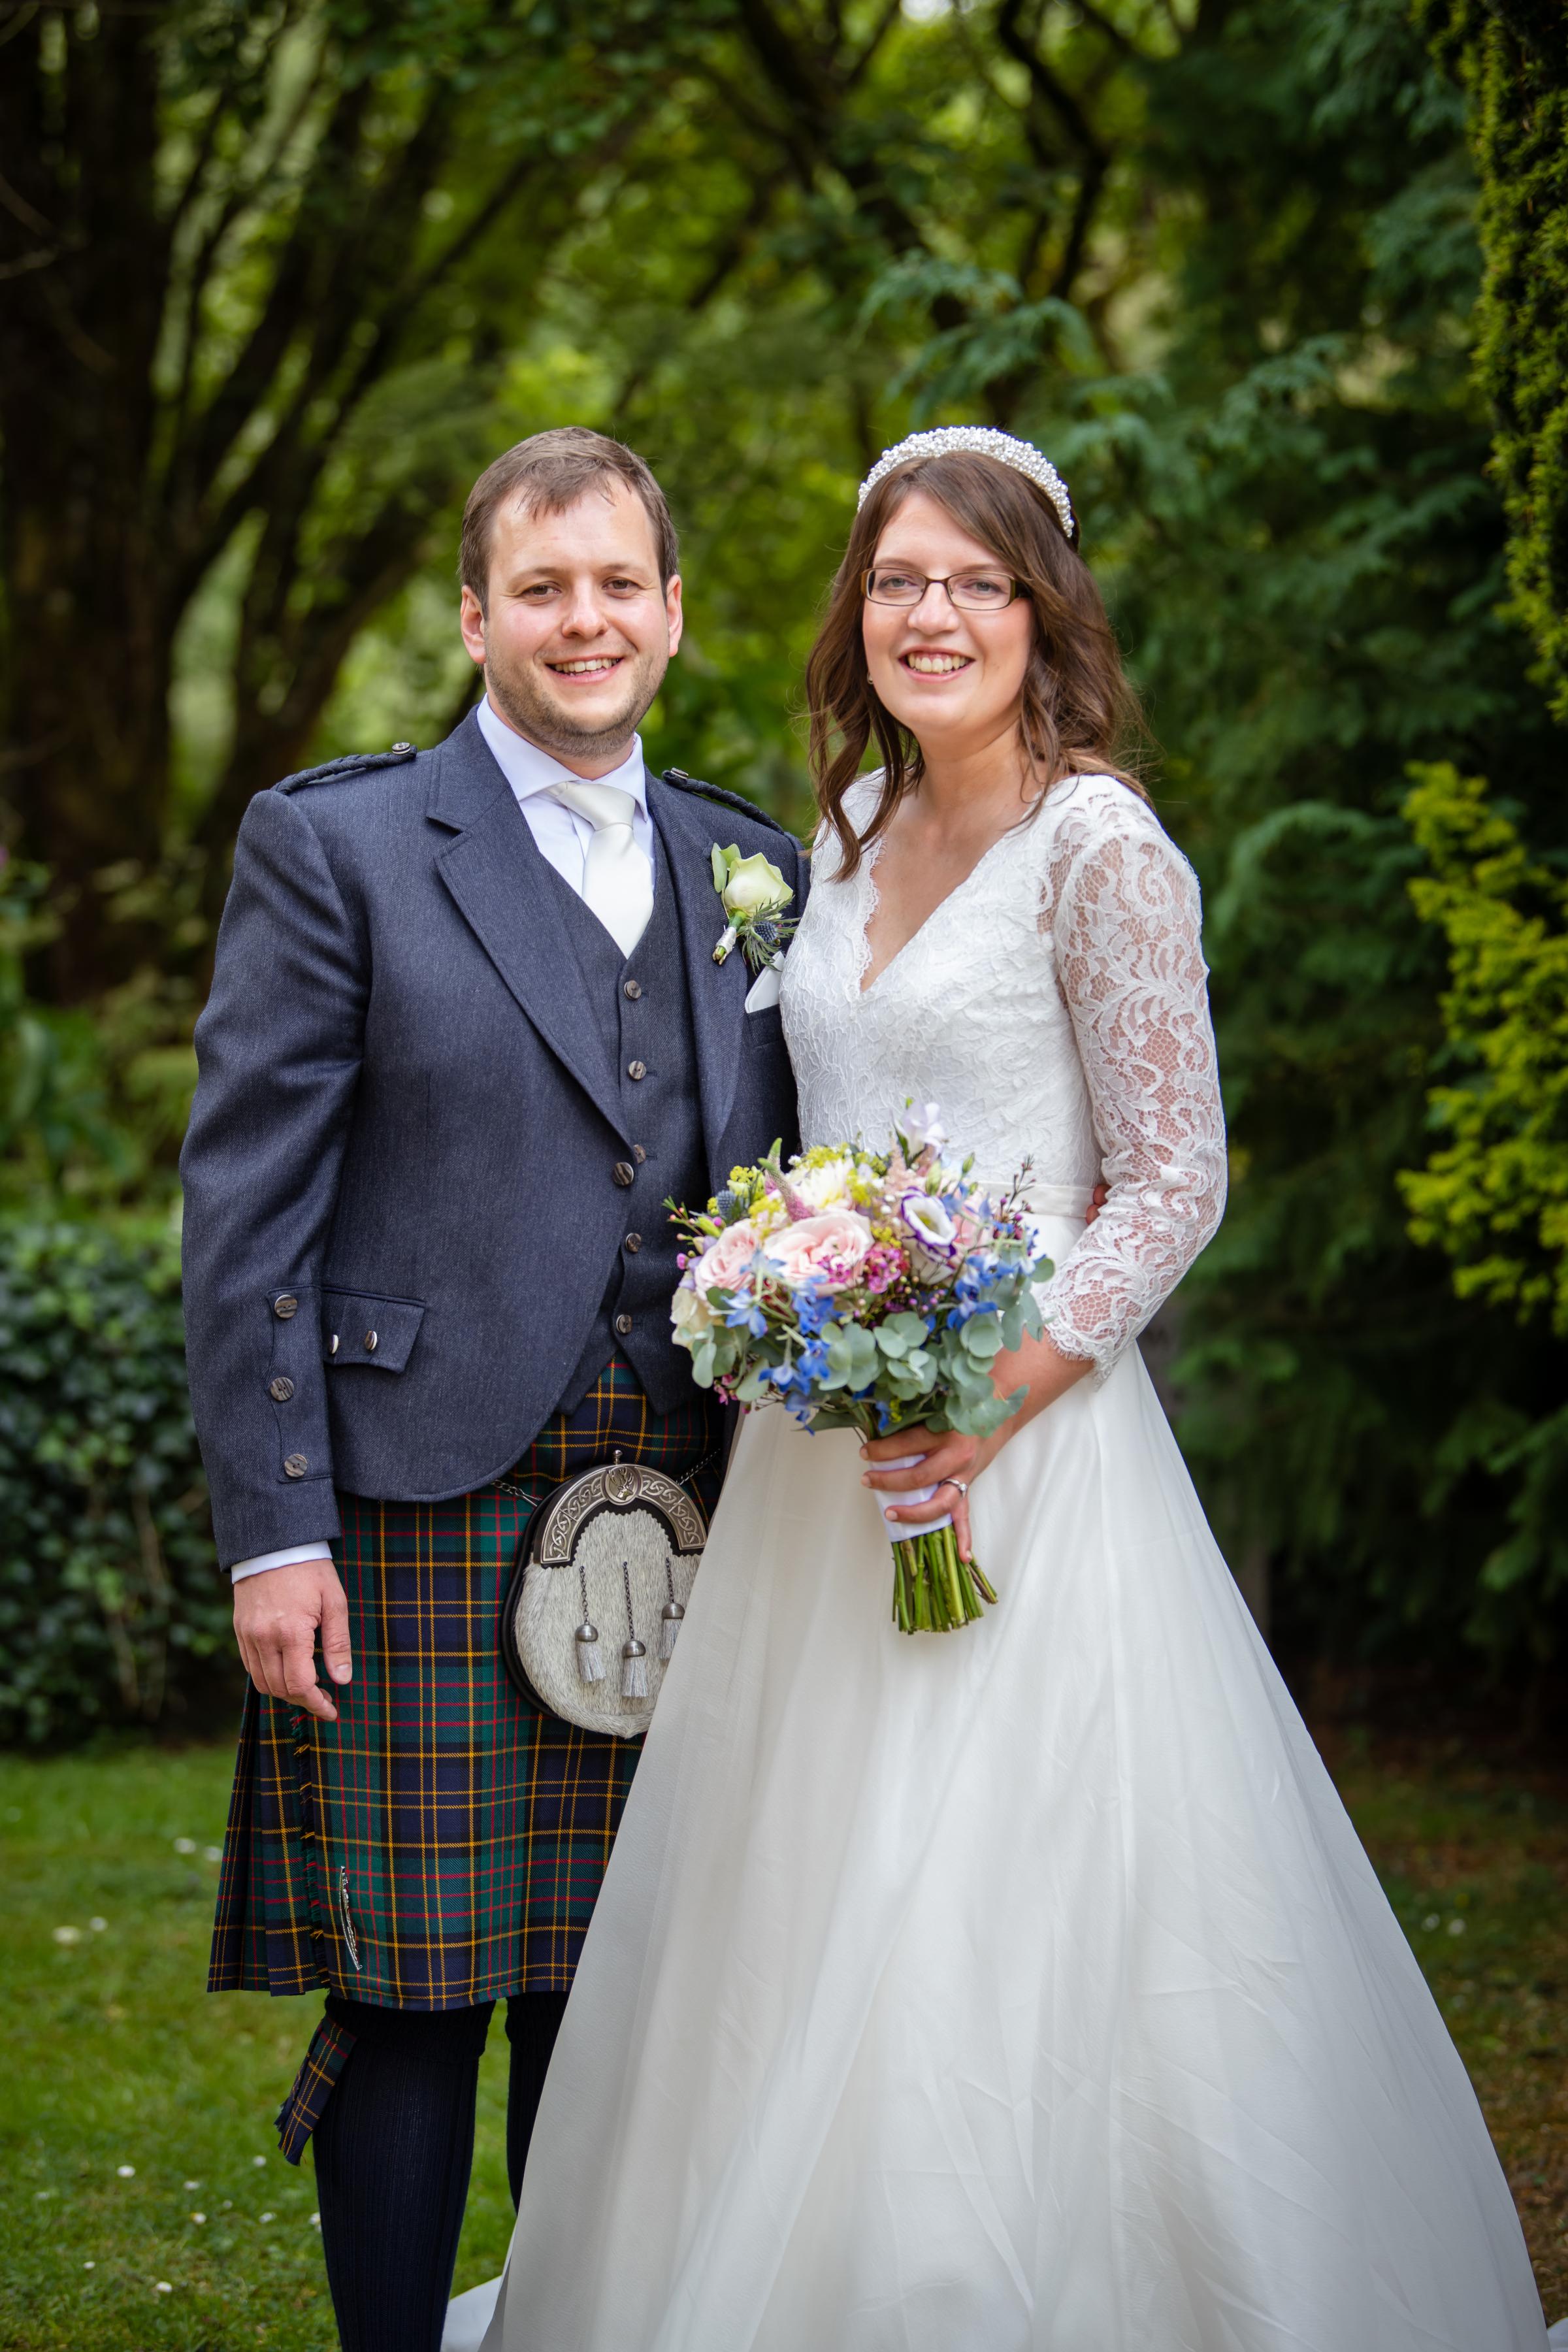 Graham and Helen on their big day. Photo: Erica Irvine Photography.